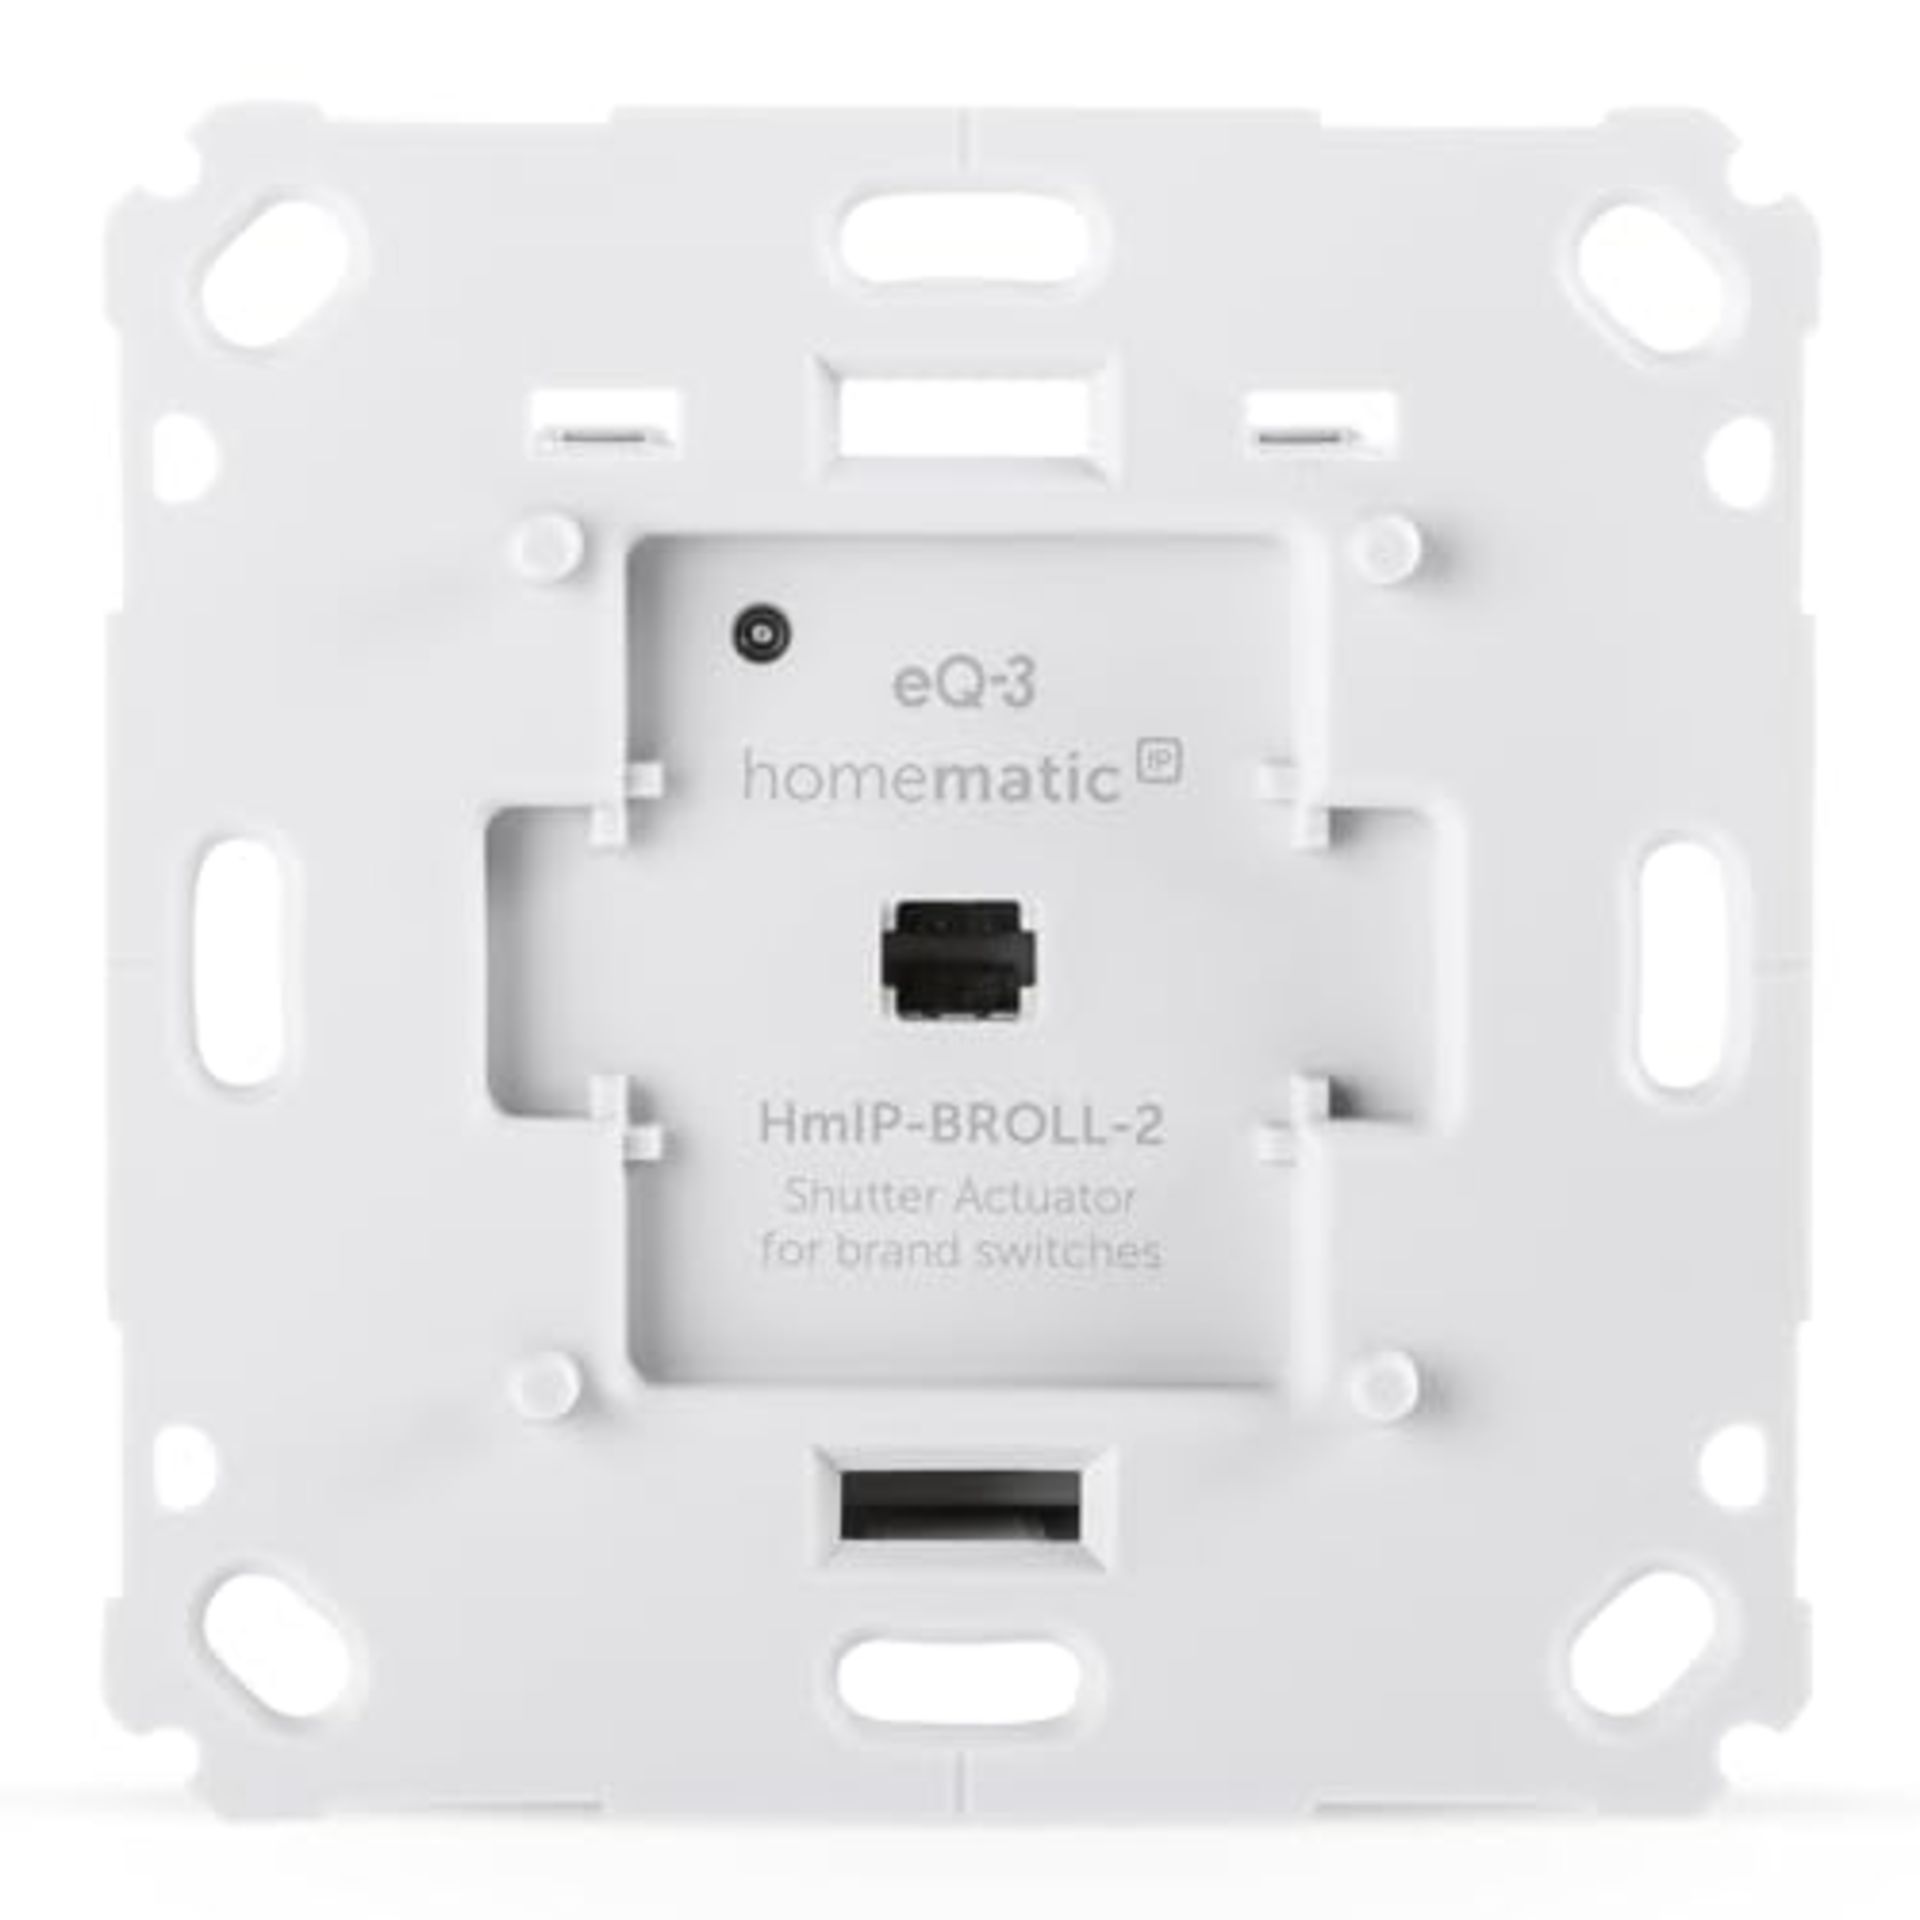 RRP £69.00 Homematic IP Smart Home Shutter Actuator for brand switches, digital control for 1 rol